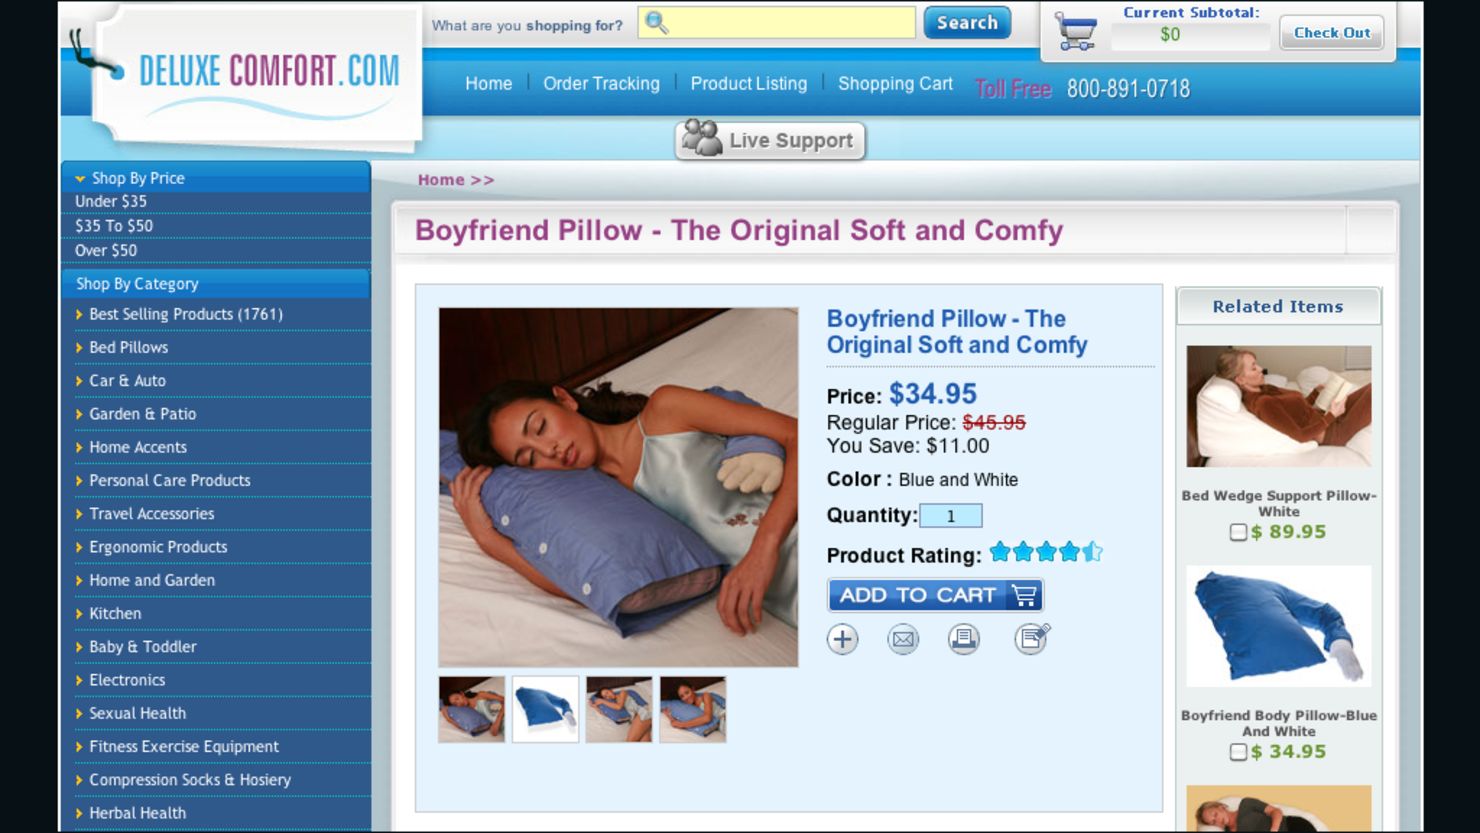 The Boyfriend Pillow, sold at DeluxeComfort.com, is a recent trending topic online.